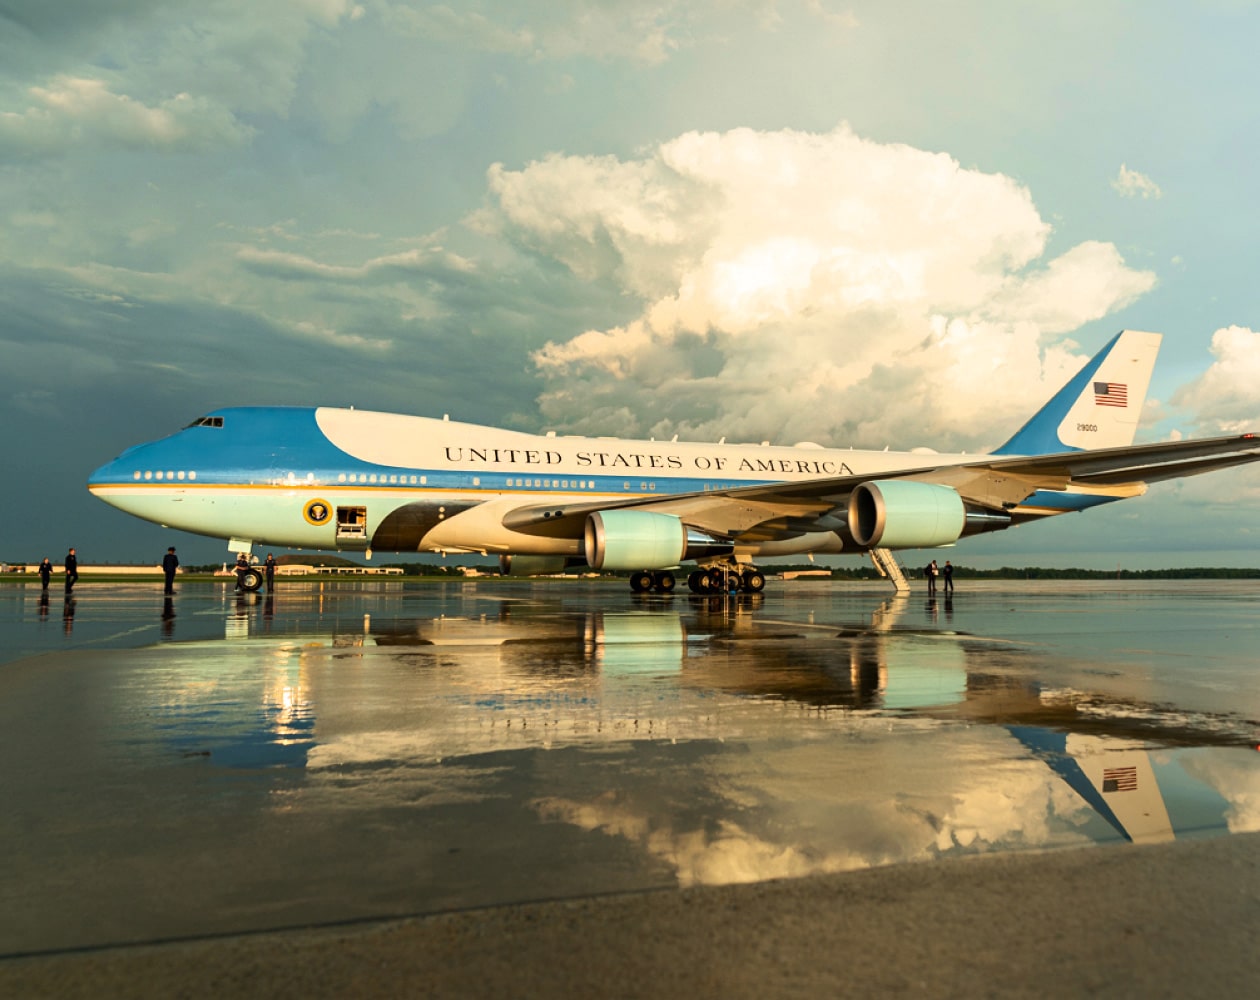 Air Force One Credits: Whitehouse